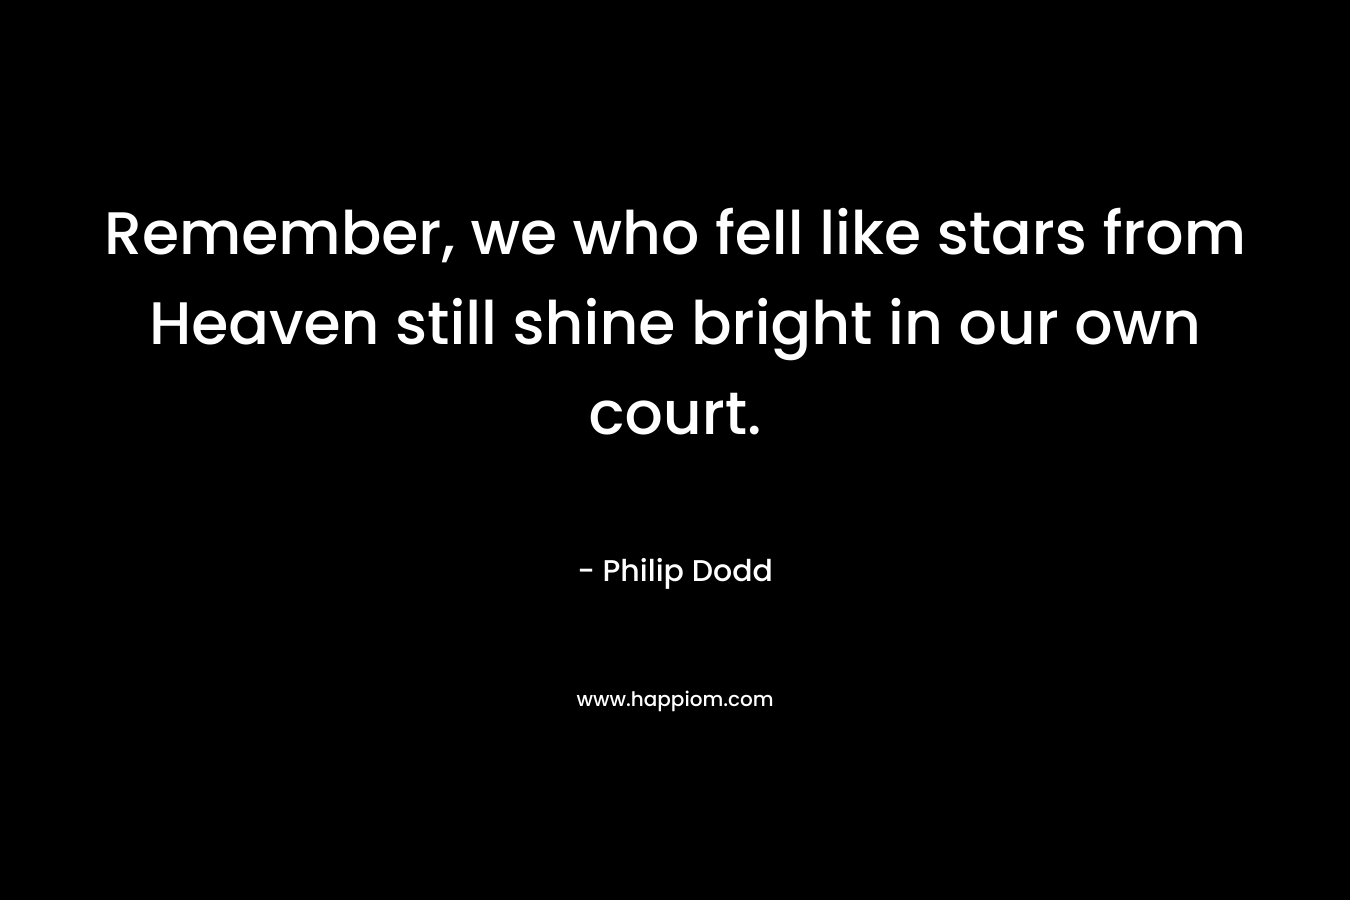 Remember, we who fell like stars from Heaven still shine bright in our own court.